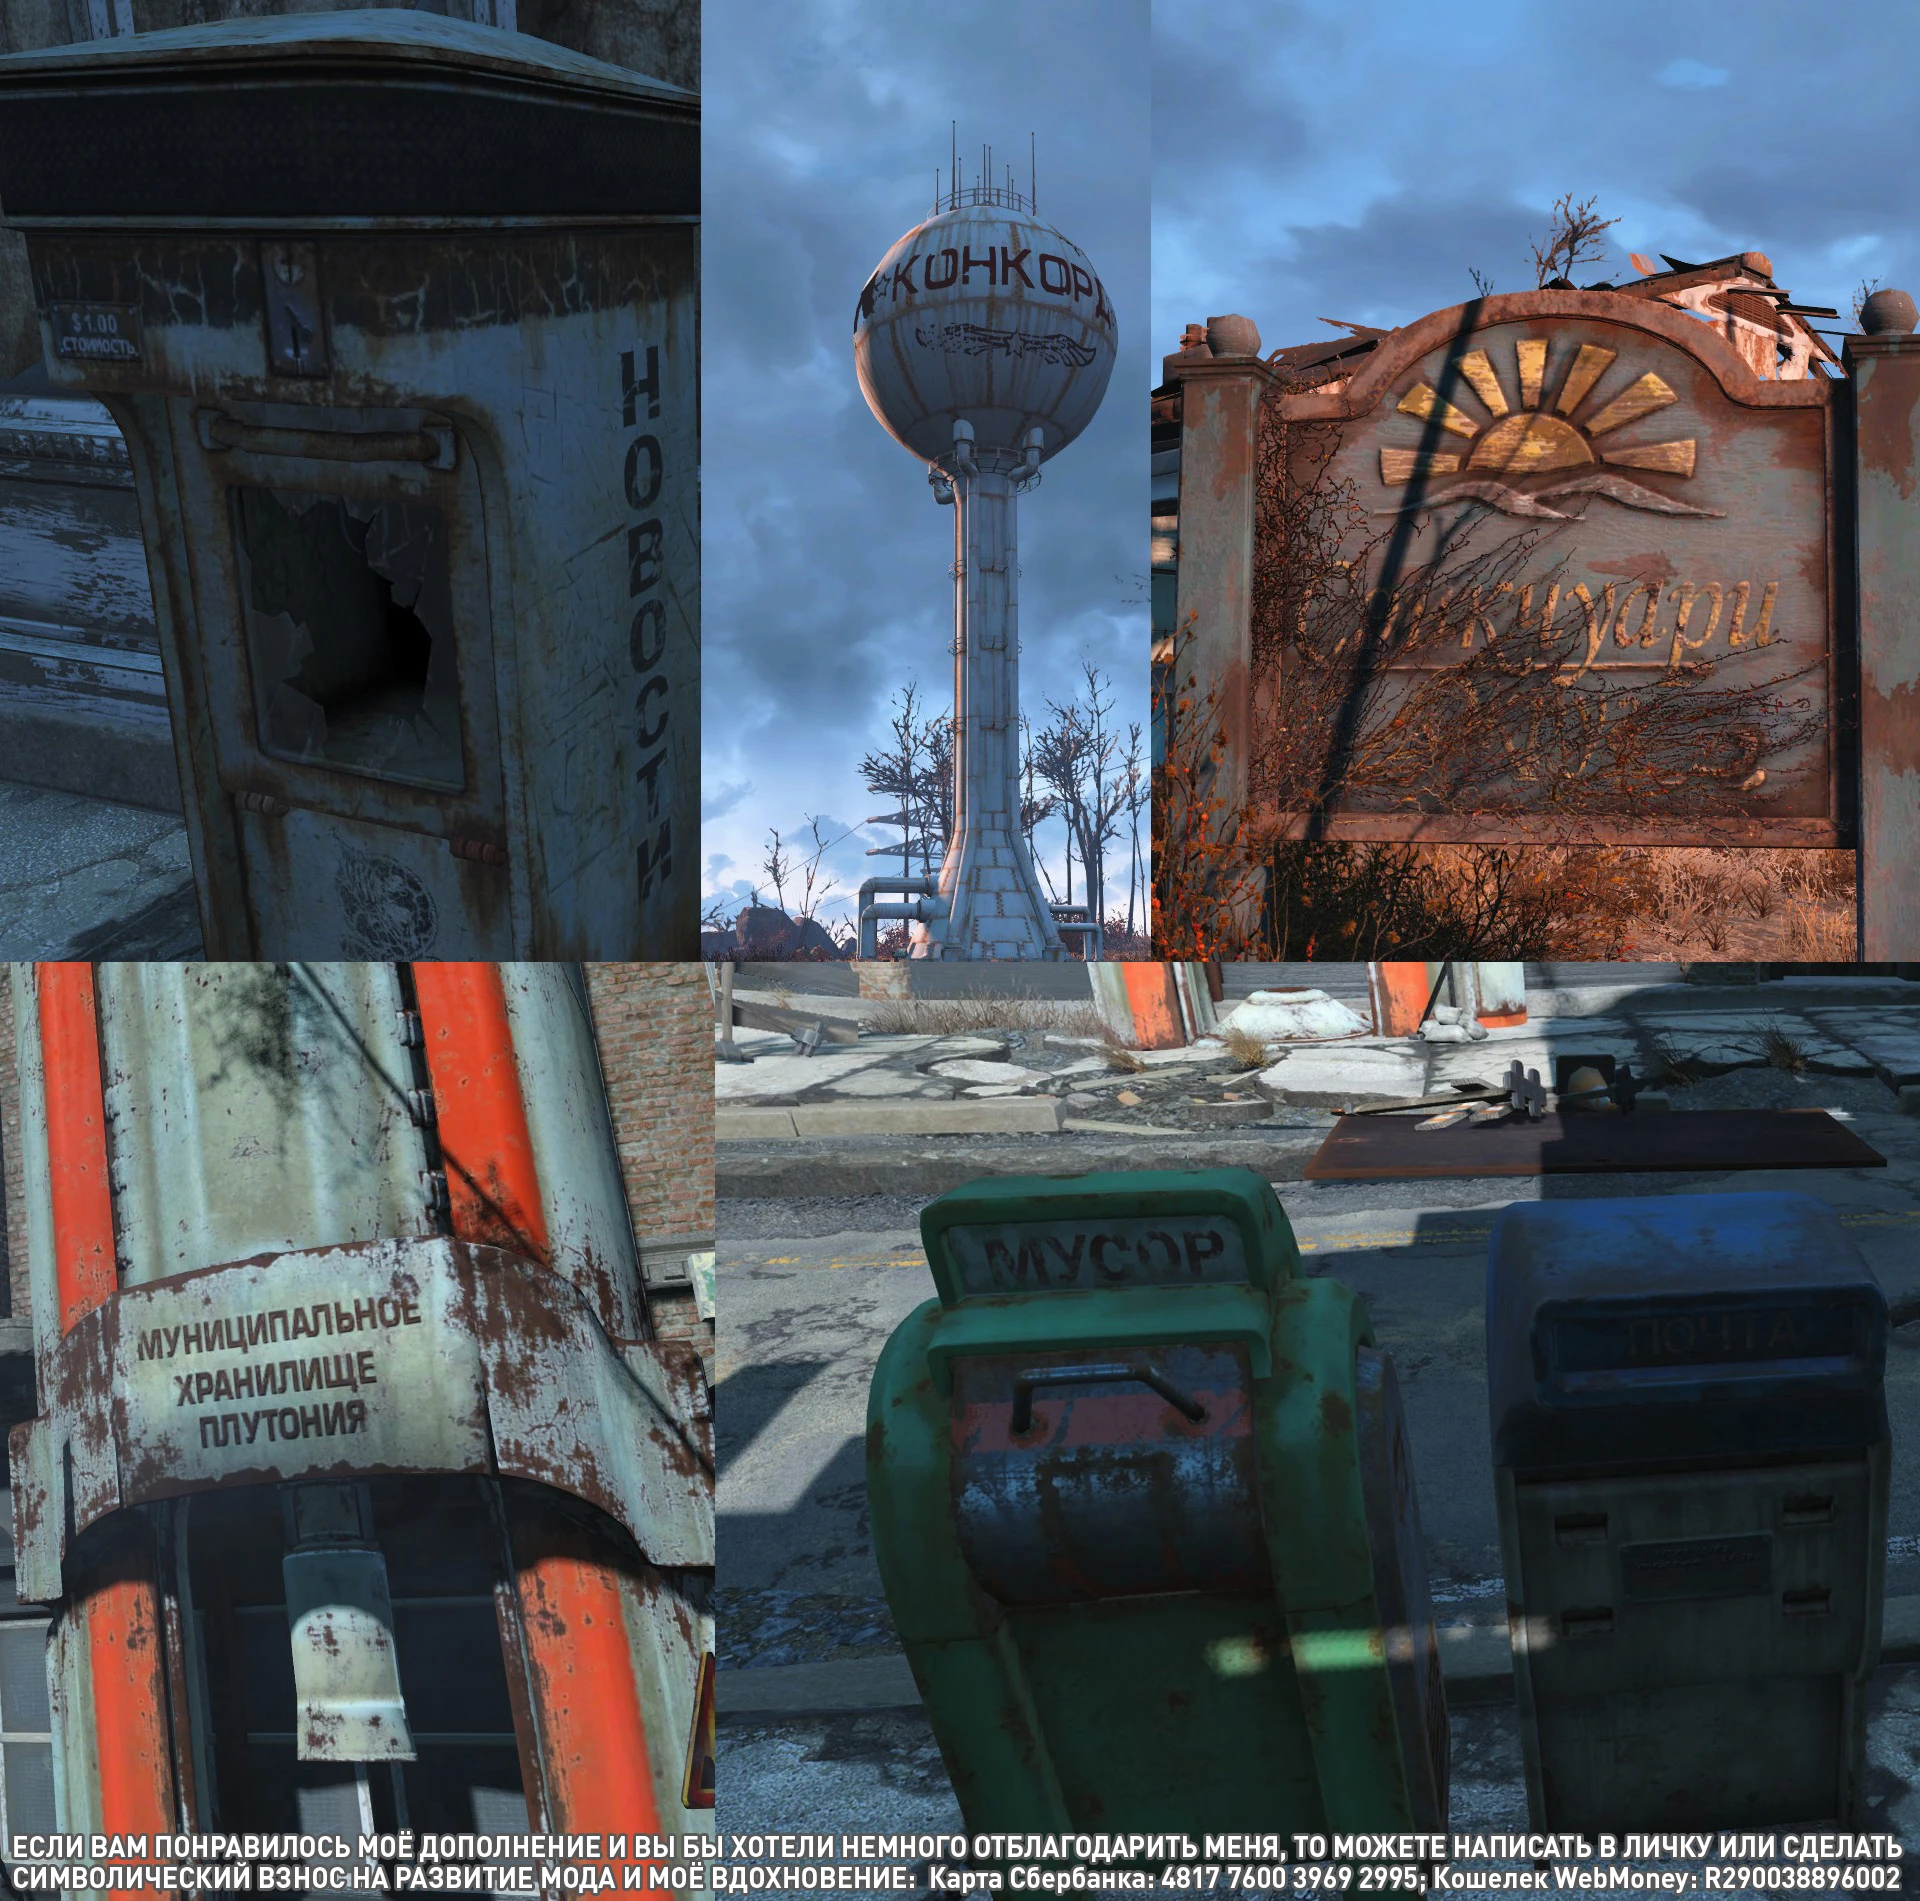 Generator textures from hiro special edition fallout 4 фото 89